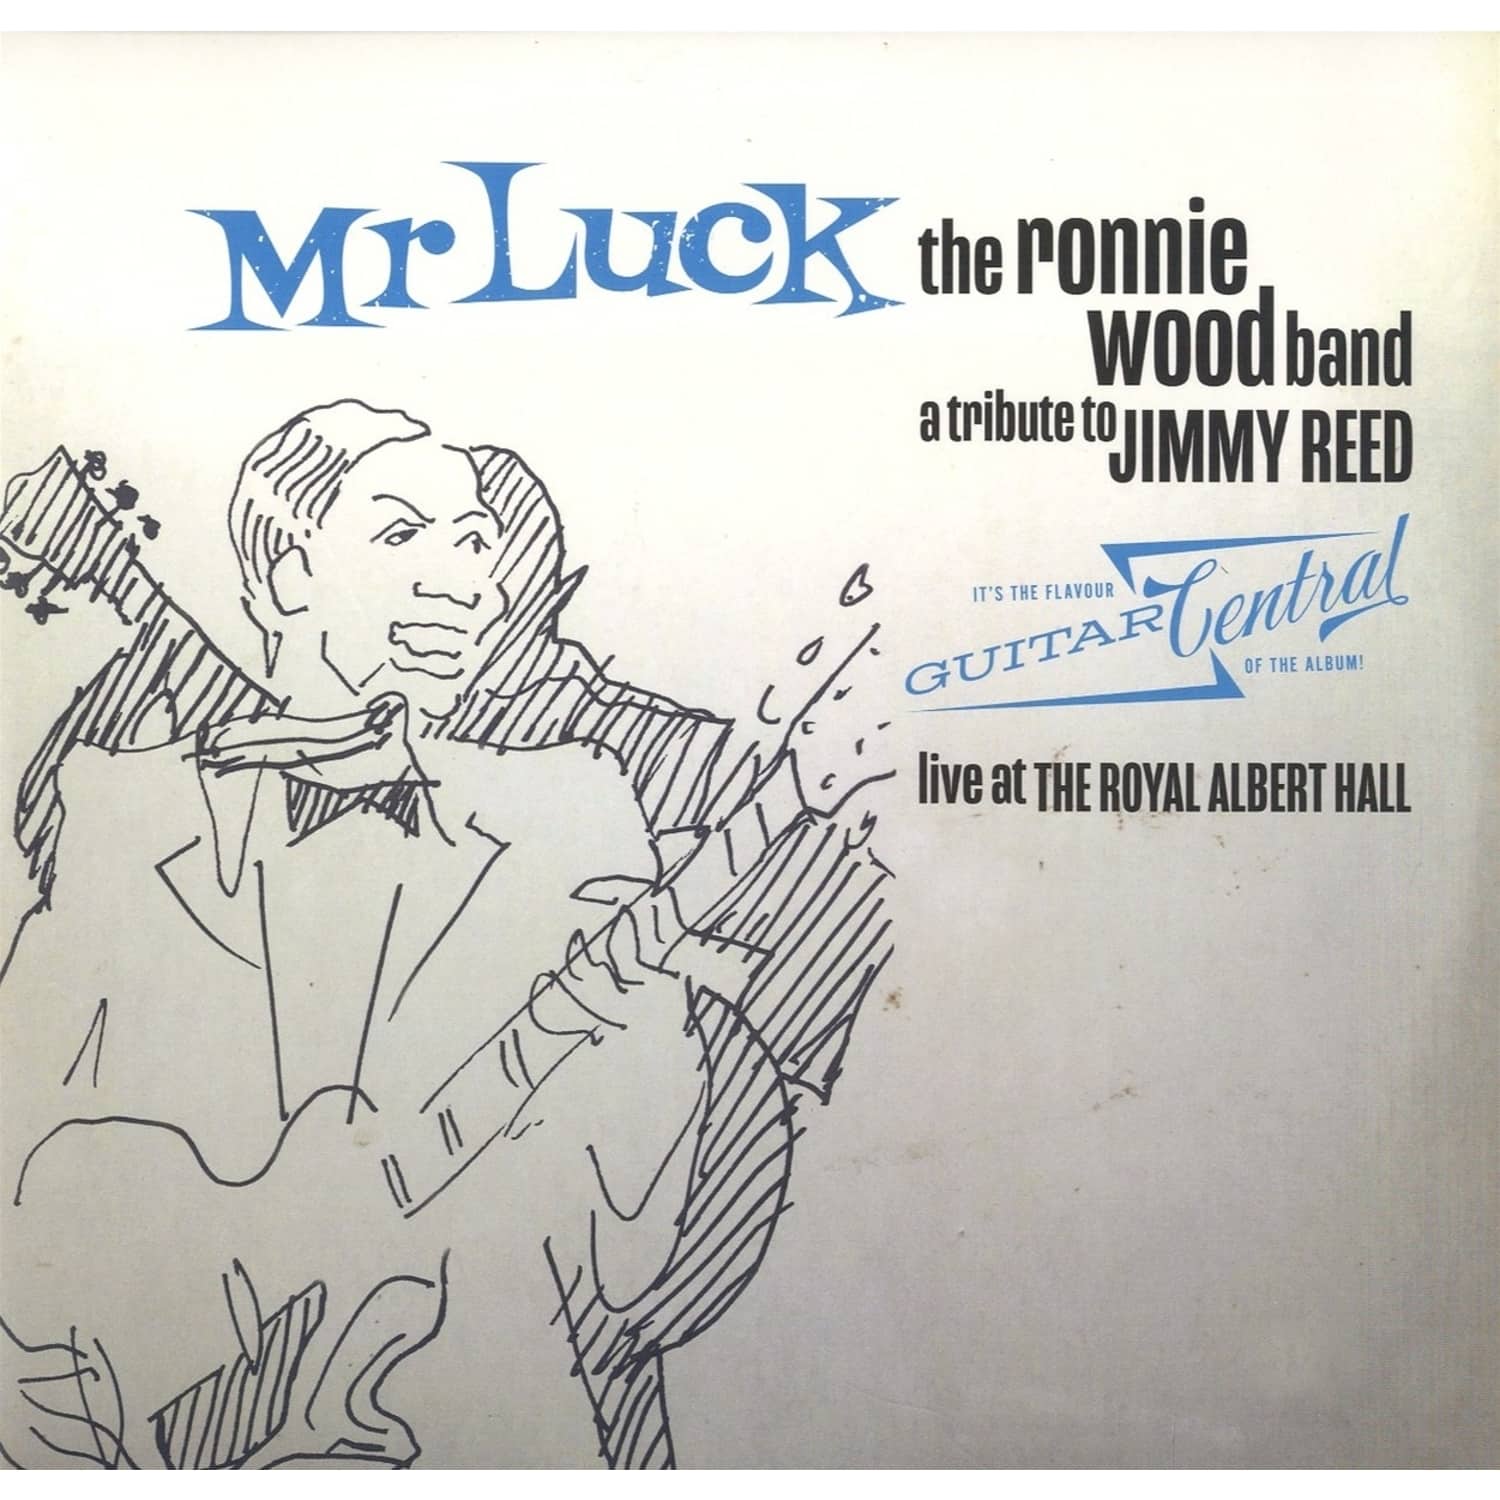 Ronnie Wood & The Ronnie Wood Band - MR.LUCK-A TRIBUTE TO JIMMY REED:LIVE AT THE ROYAL 